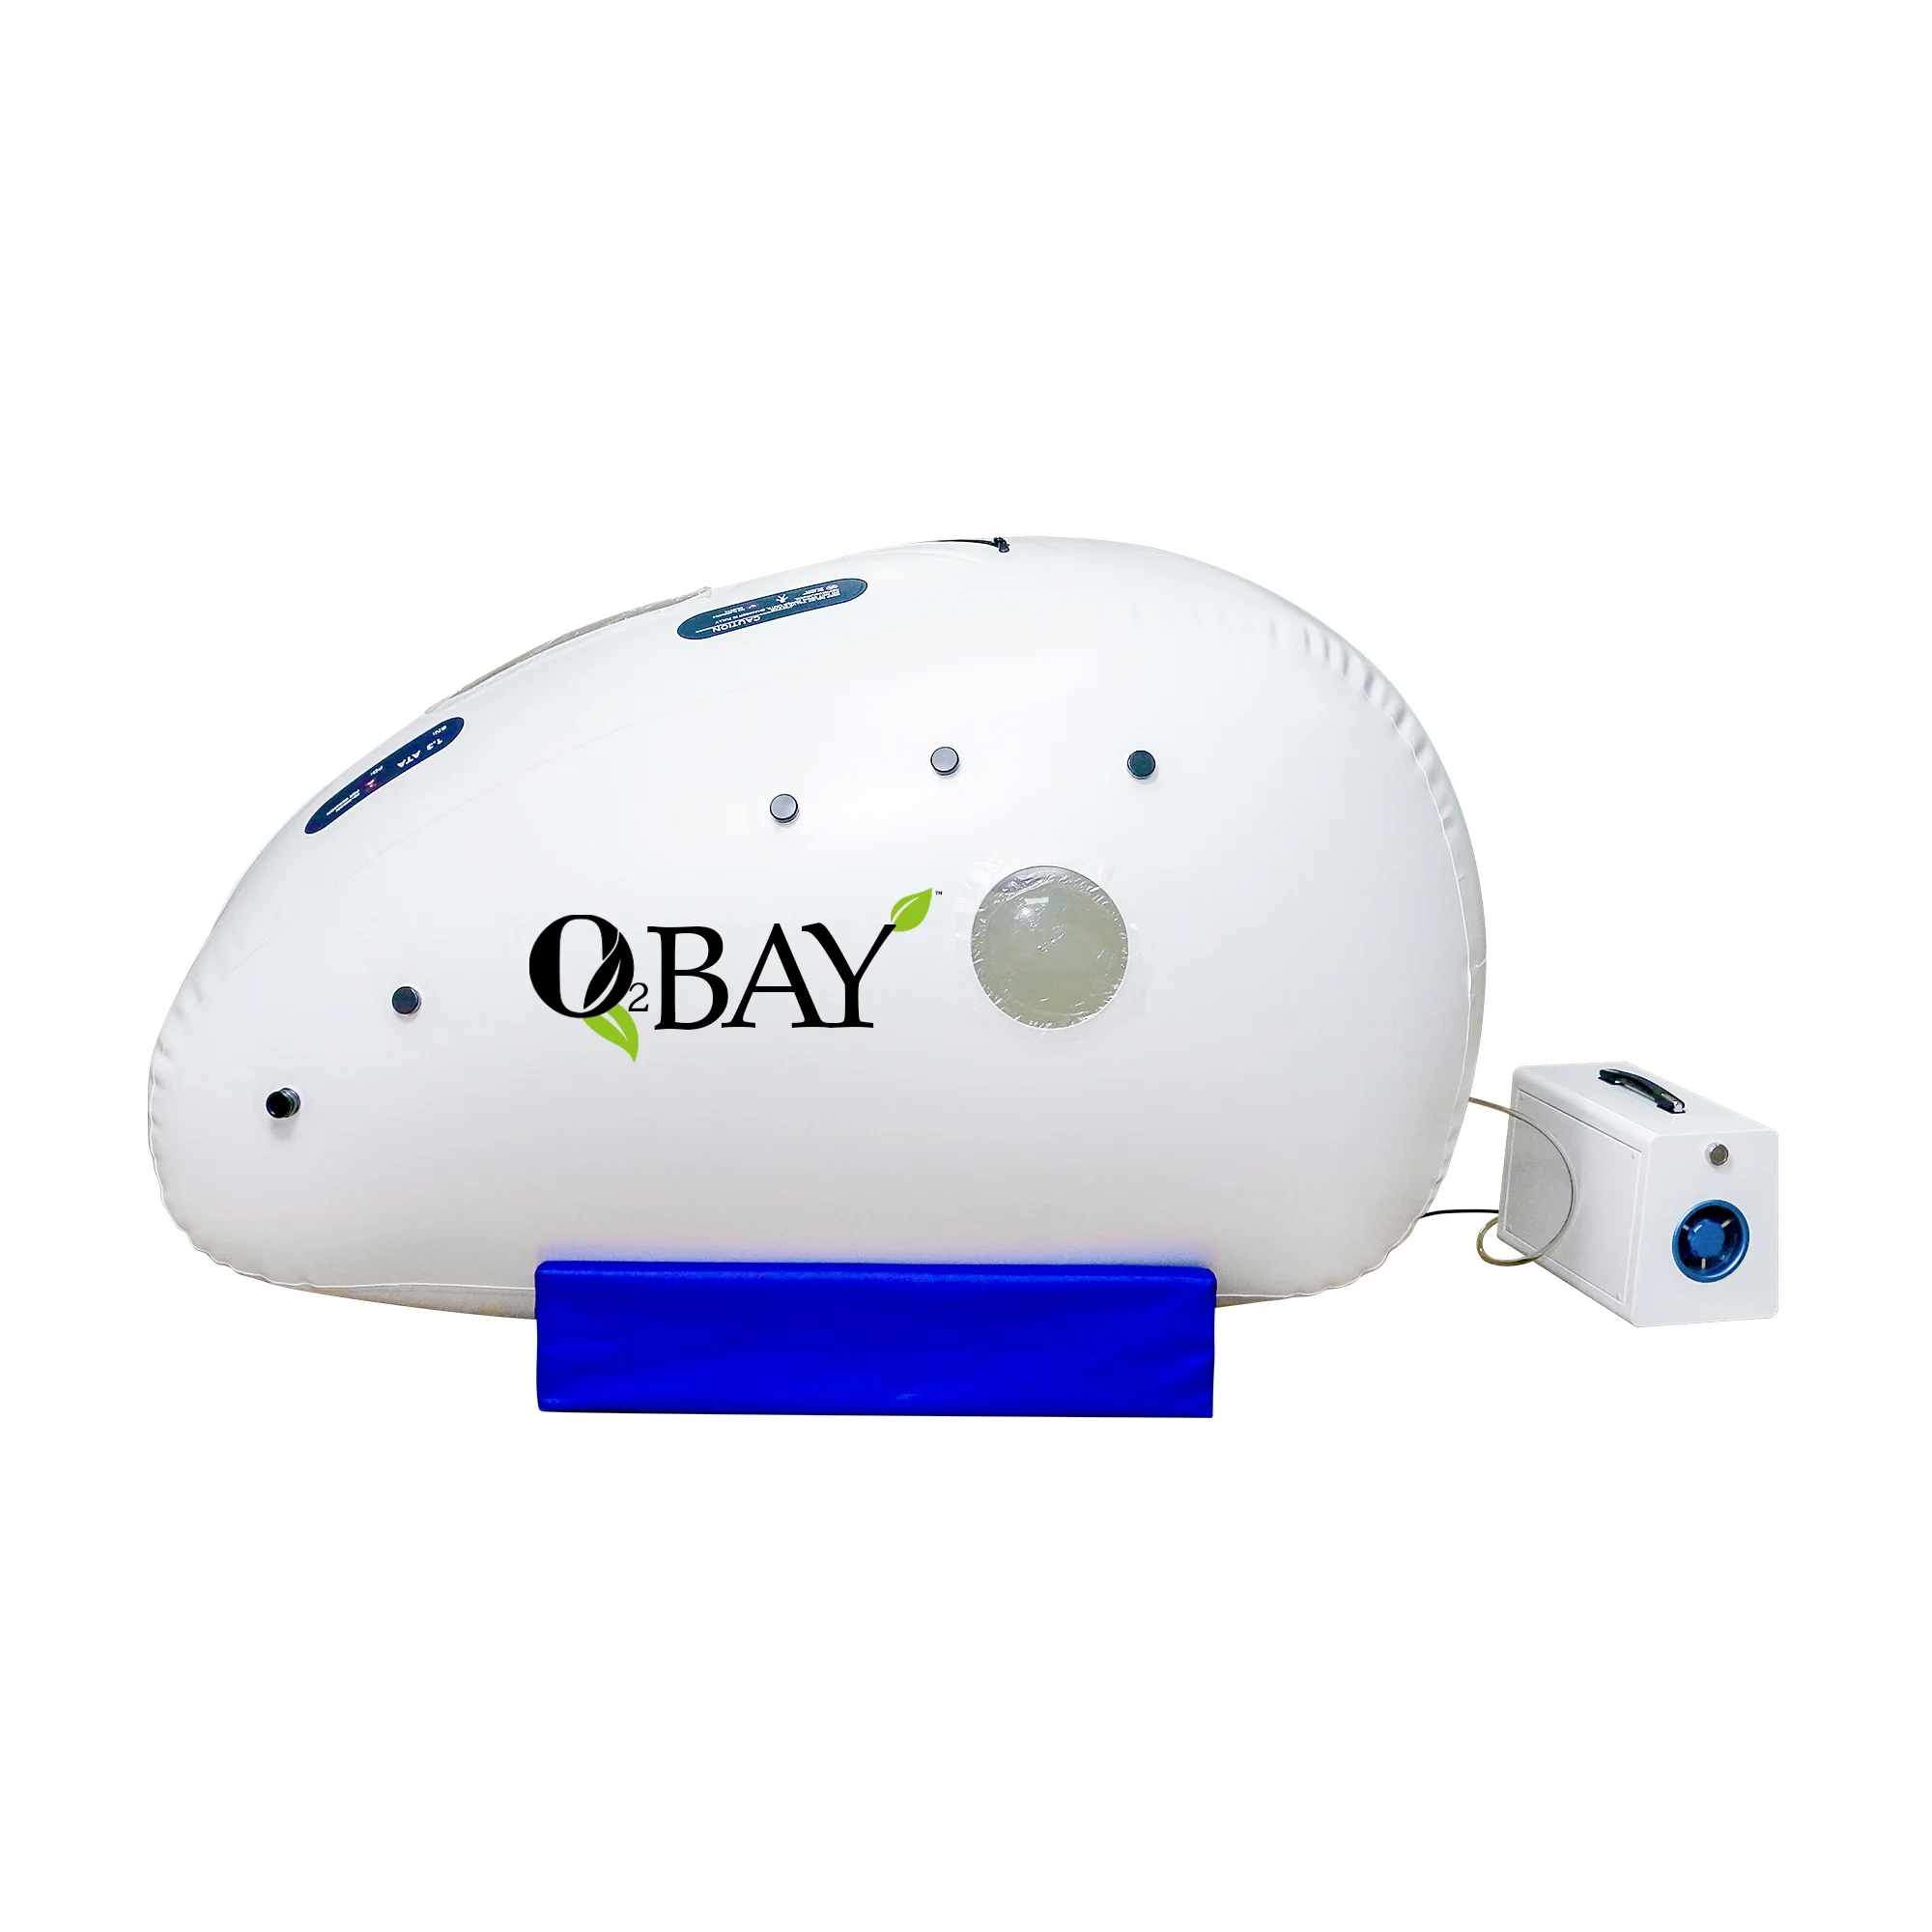 O2BAY natural therapy for healthy beauty sports hyperbaric chambers